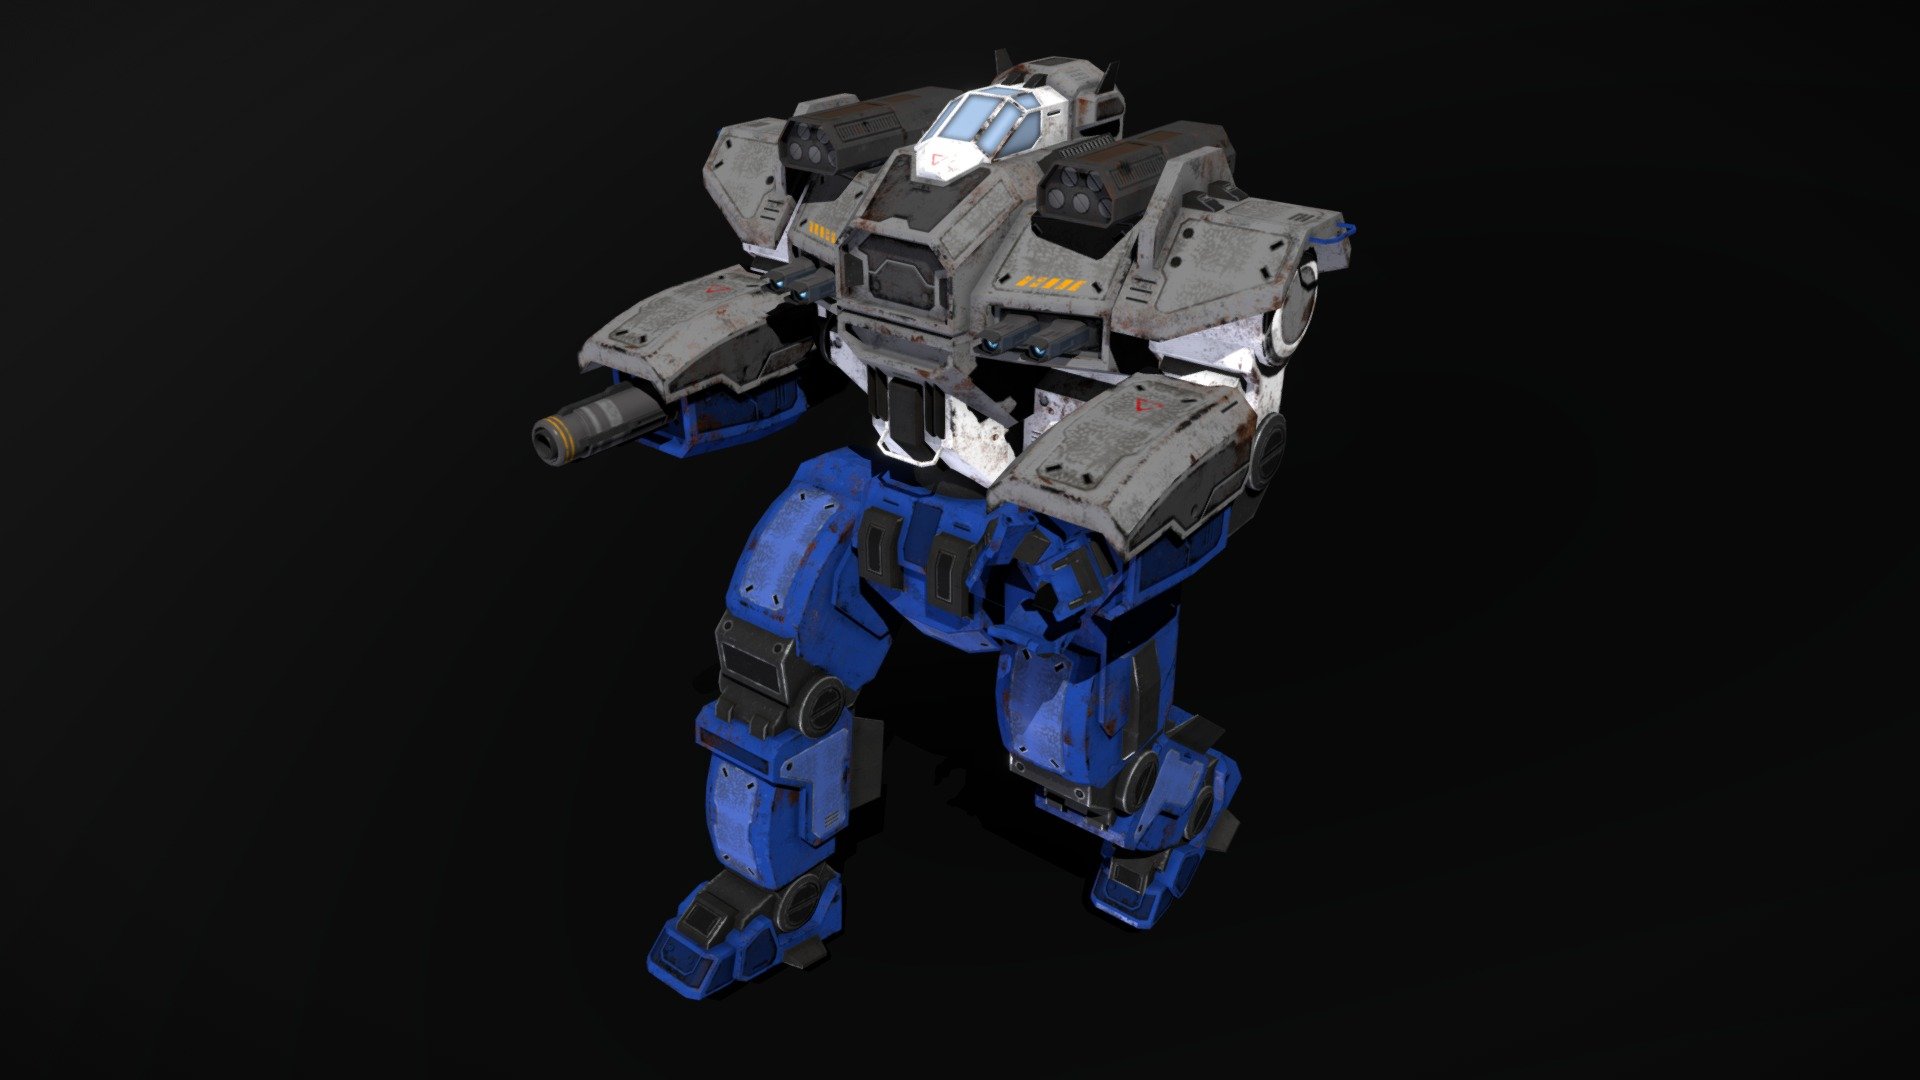 This is a model of a low-poly and game-ready scifi mech. 




30+ animations (in place + root motion)

Non-humanoid Skeleton with 19 bones

Modular weapon design

Canons, lasers, MGs, long- and short-range-missile launchers

2 missiles, 2 projectiles

34 decals

Arms are destructible (can be blown off)

Hands have no bones and are not animated

Hands are optional and can be removed/replaced with weapons

5 different texture sets

PSDs with intact layers are included

The weapons are separate meshes and can be animated with a keyframe animation tool. The weapon loadout can be changed as well.

Please note: The textures in the Sketchfab viewer have a reduced resolution to improve Sketchfab loading speed.

If you have bought this model please make sure to download the “additional file”.  It contains FBX meshes, full resolution textures and the source PSDs with intact layers. The meshes are separate and can be animated (e.g. firing animations for gun barrels) 3d model